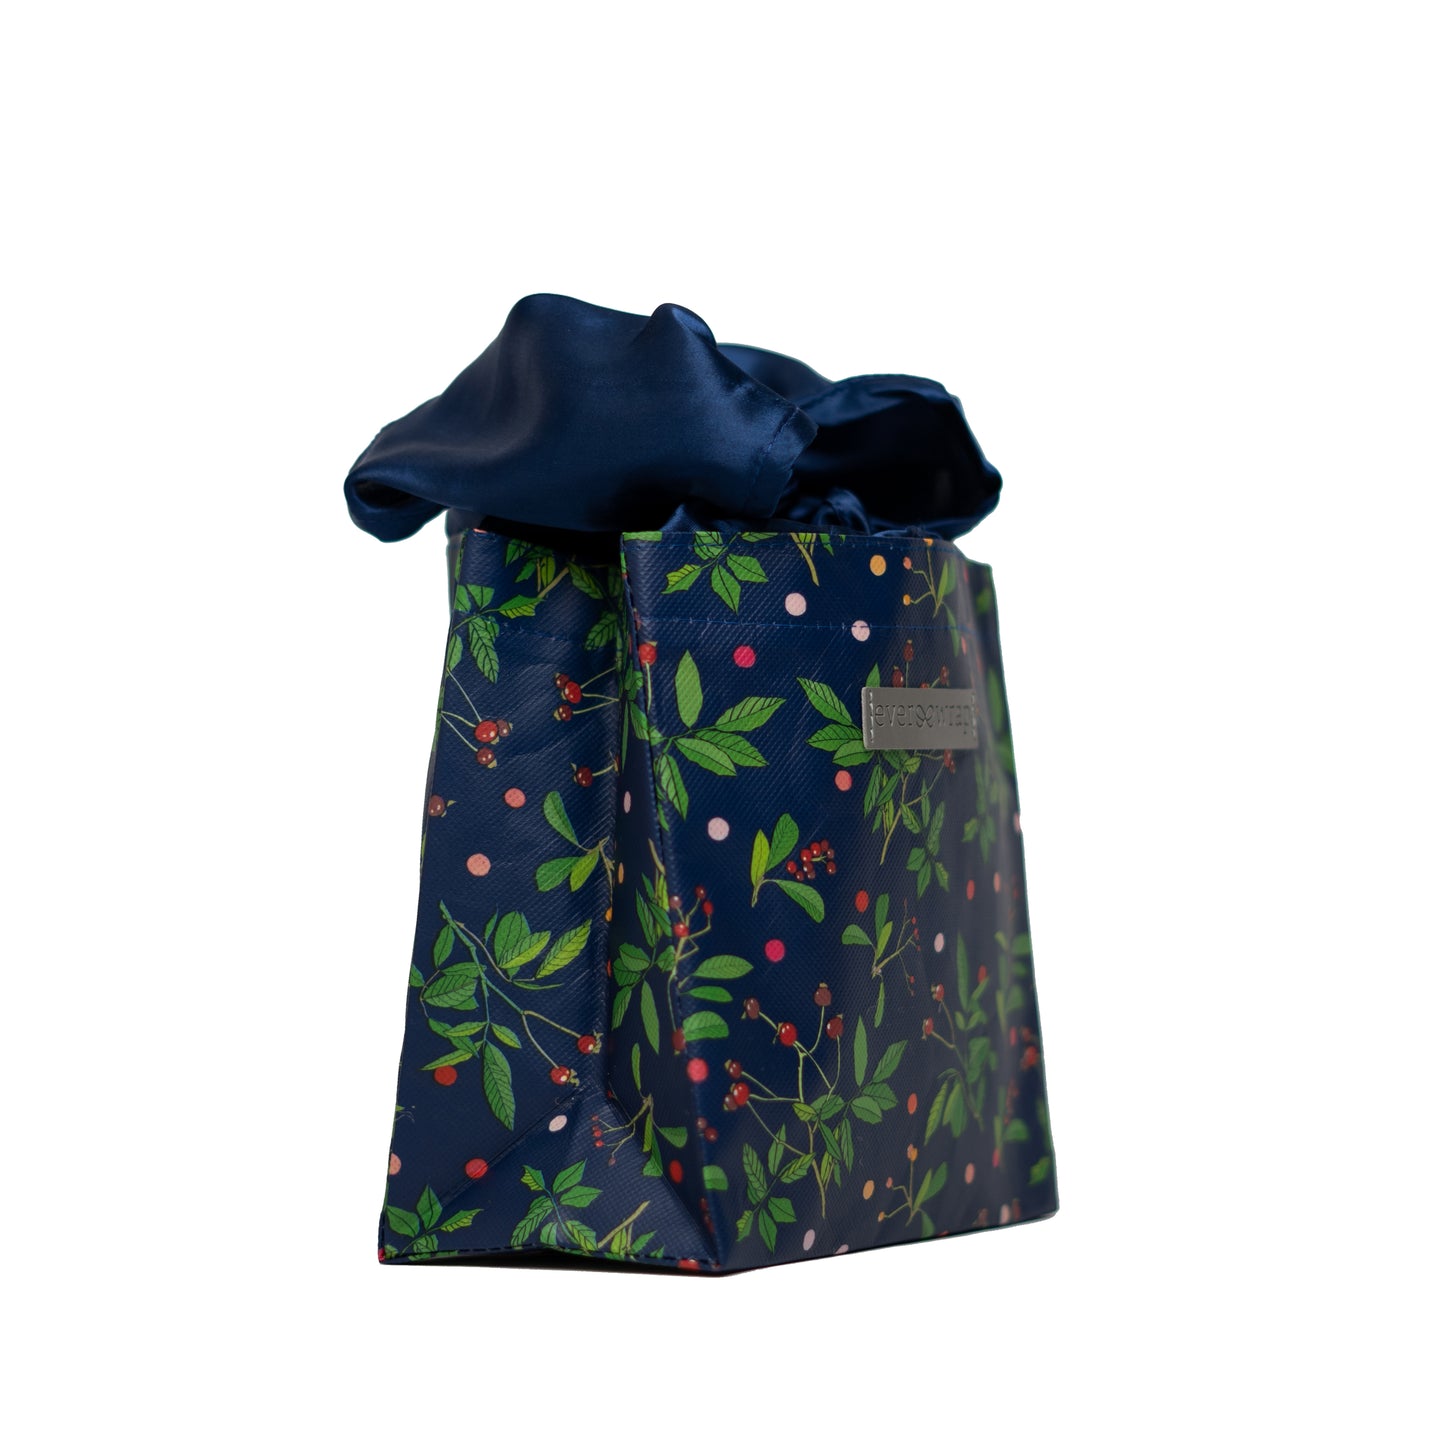 IRREGULAR - Blue Reusable gift bag, Berry and Green Foliage with Royal Blue Satin Bow makes storing and reusing this gift bag an easy sustainable zero-waste choice - EverWrap